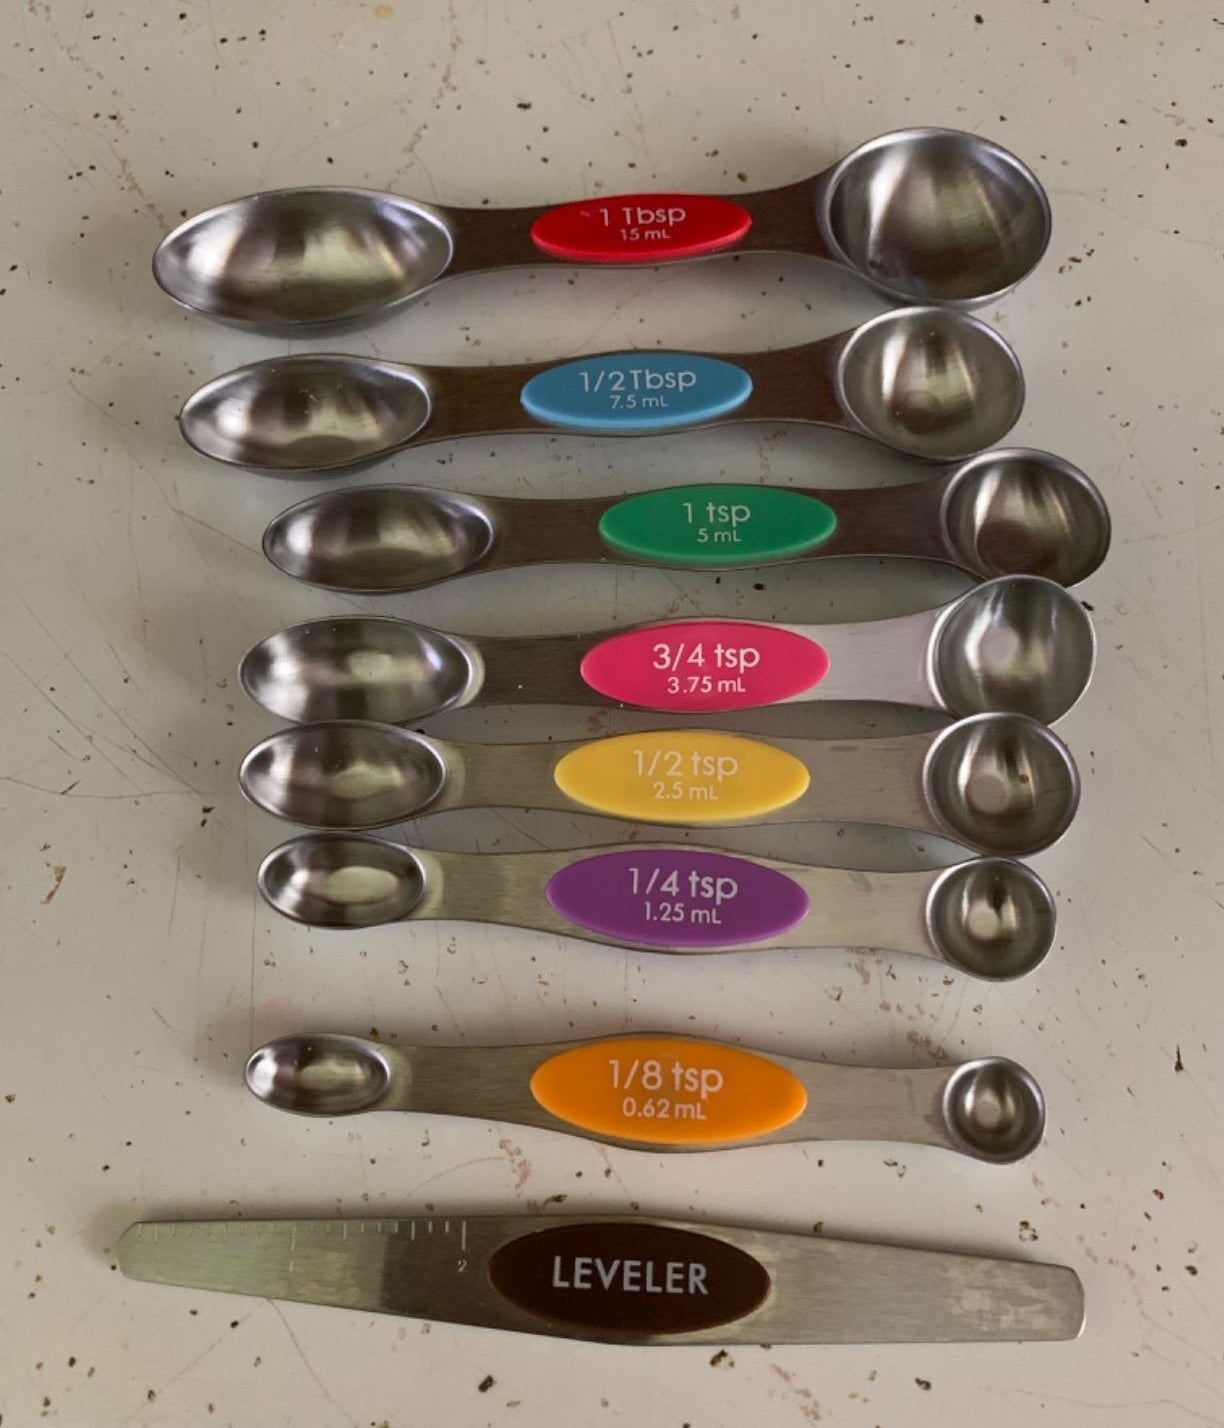 Reviewer image of measuring spoons